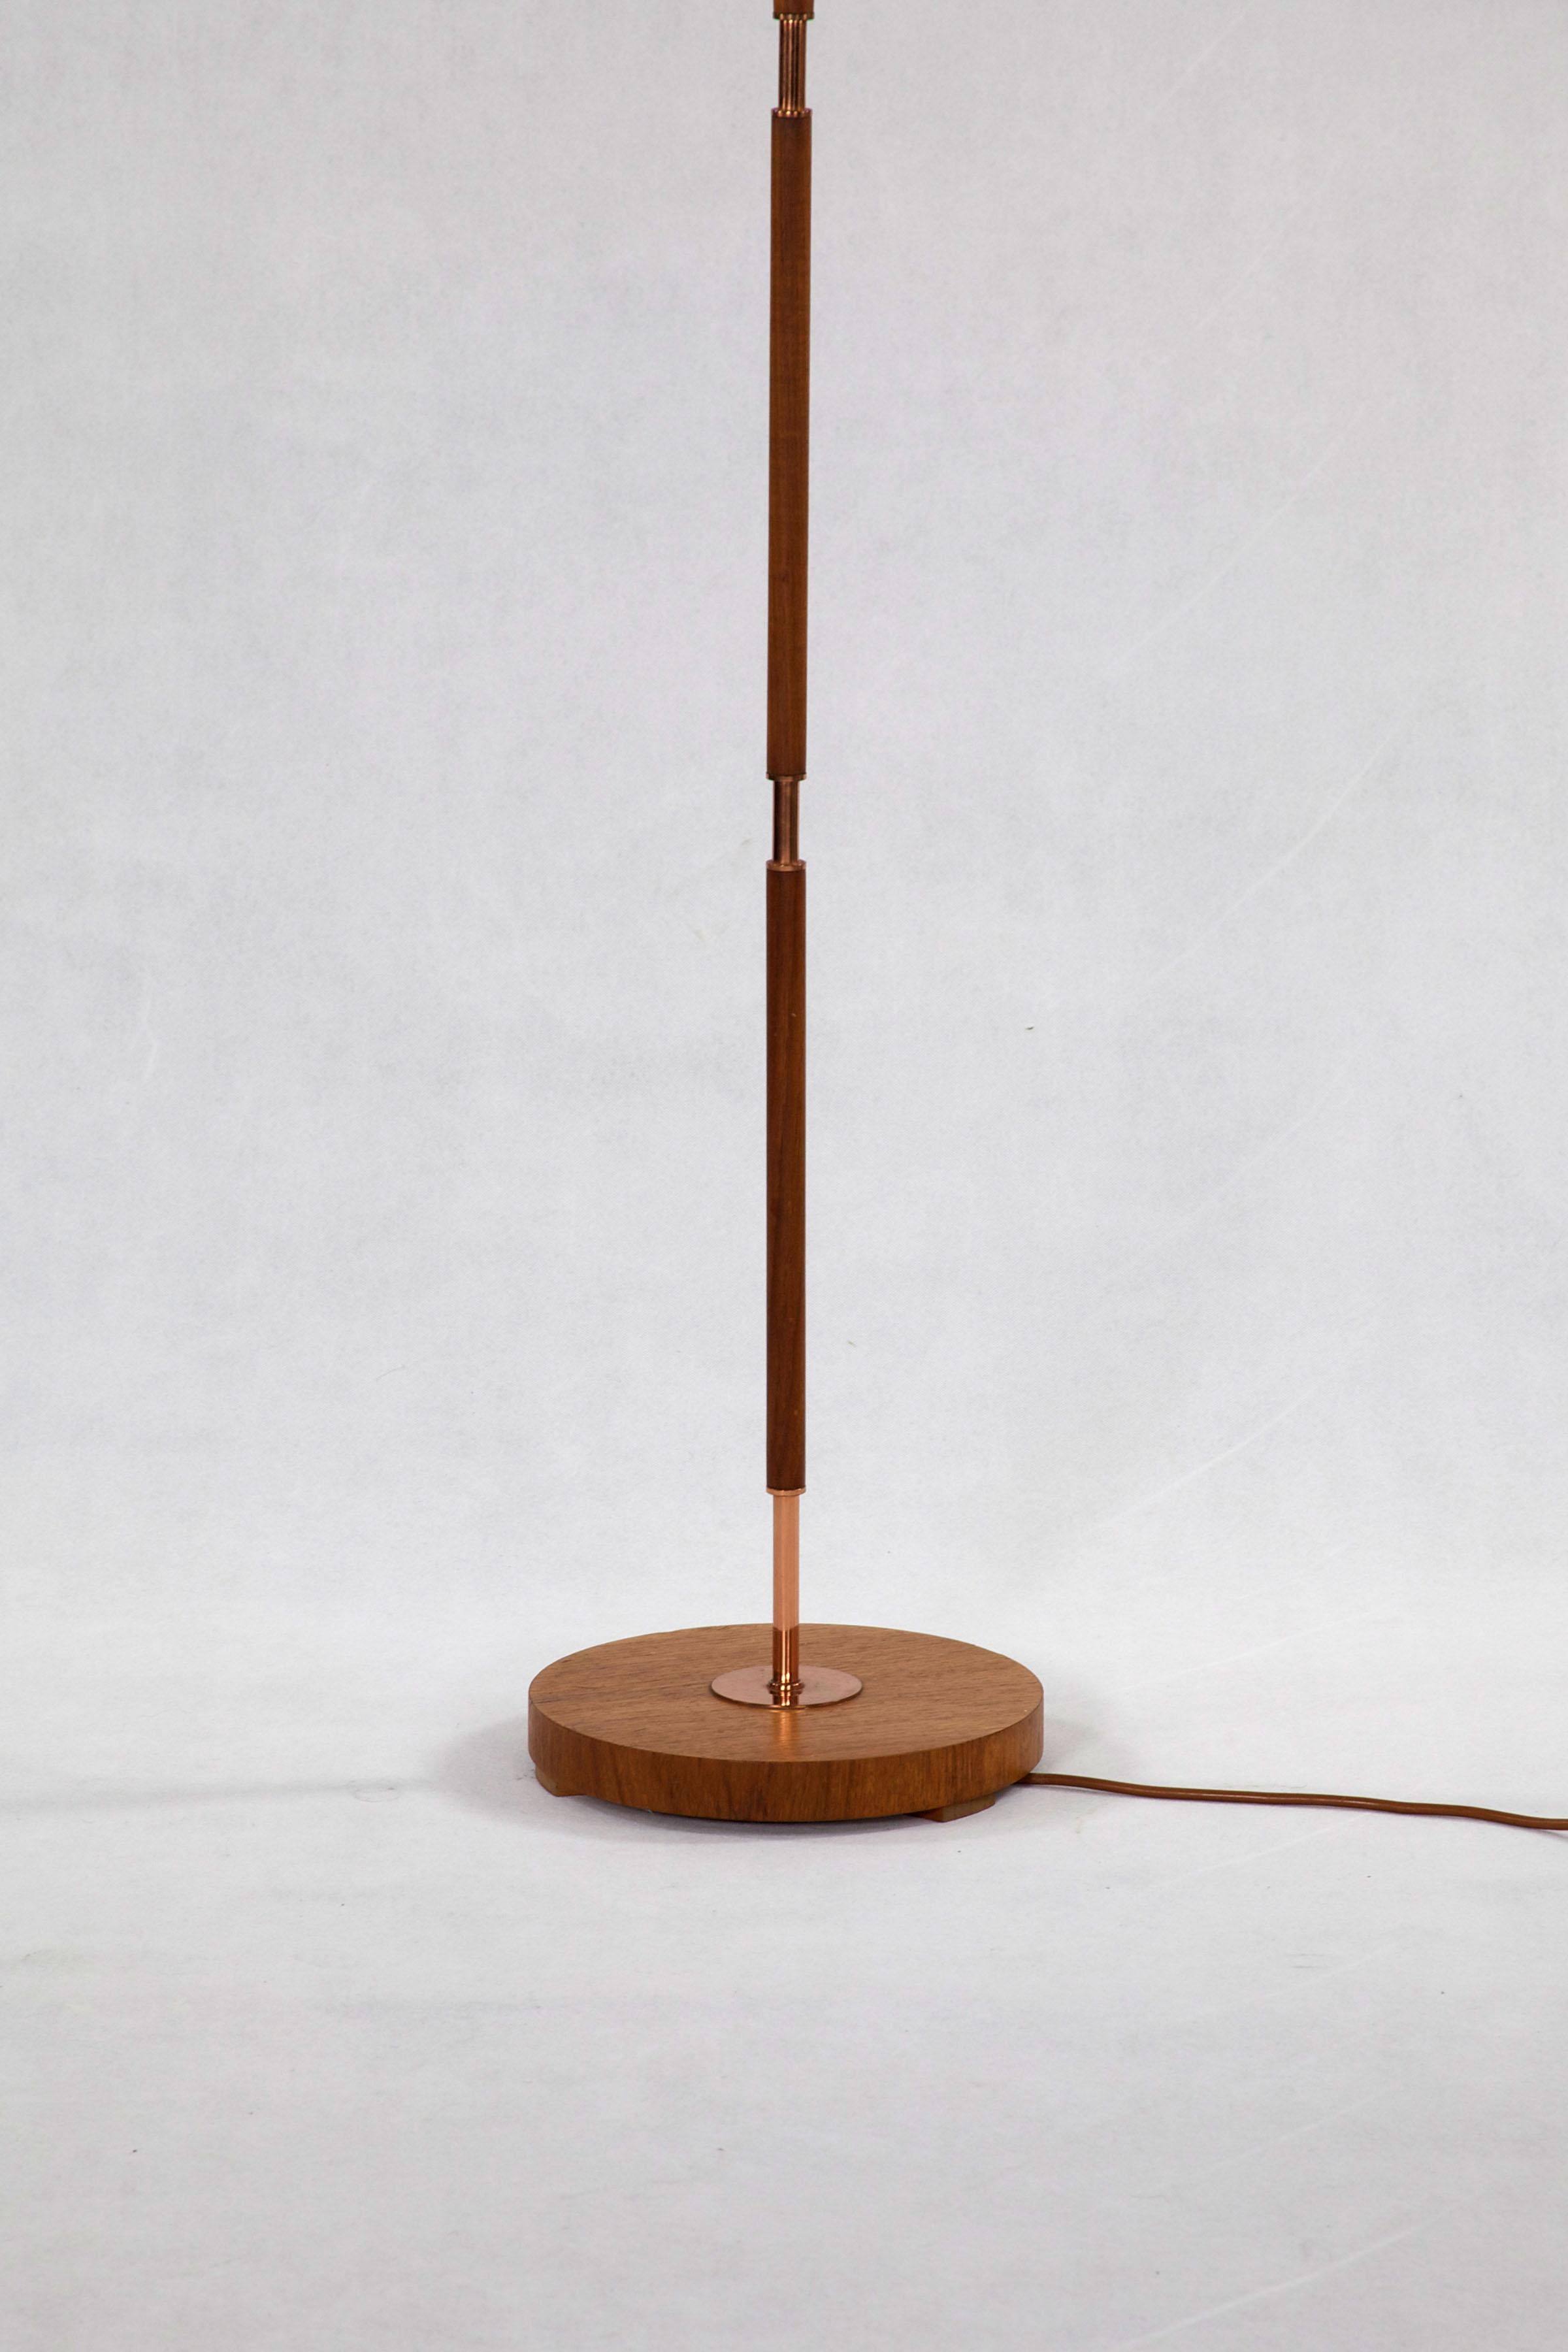 Mid-Century Modern Floor Lamp, Design and Manufacturing by Temde, Germany, 1960s